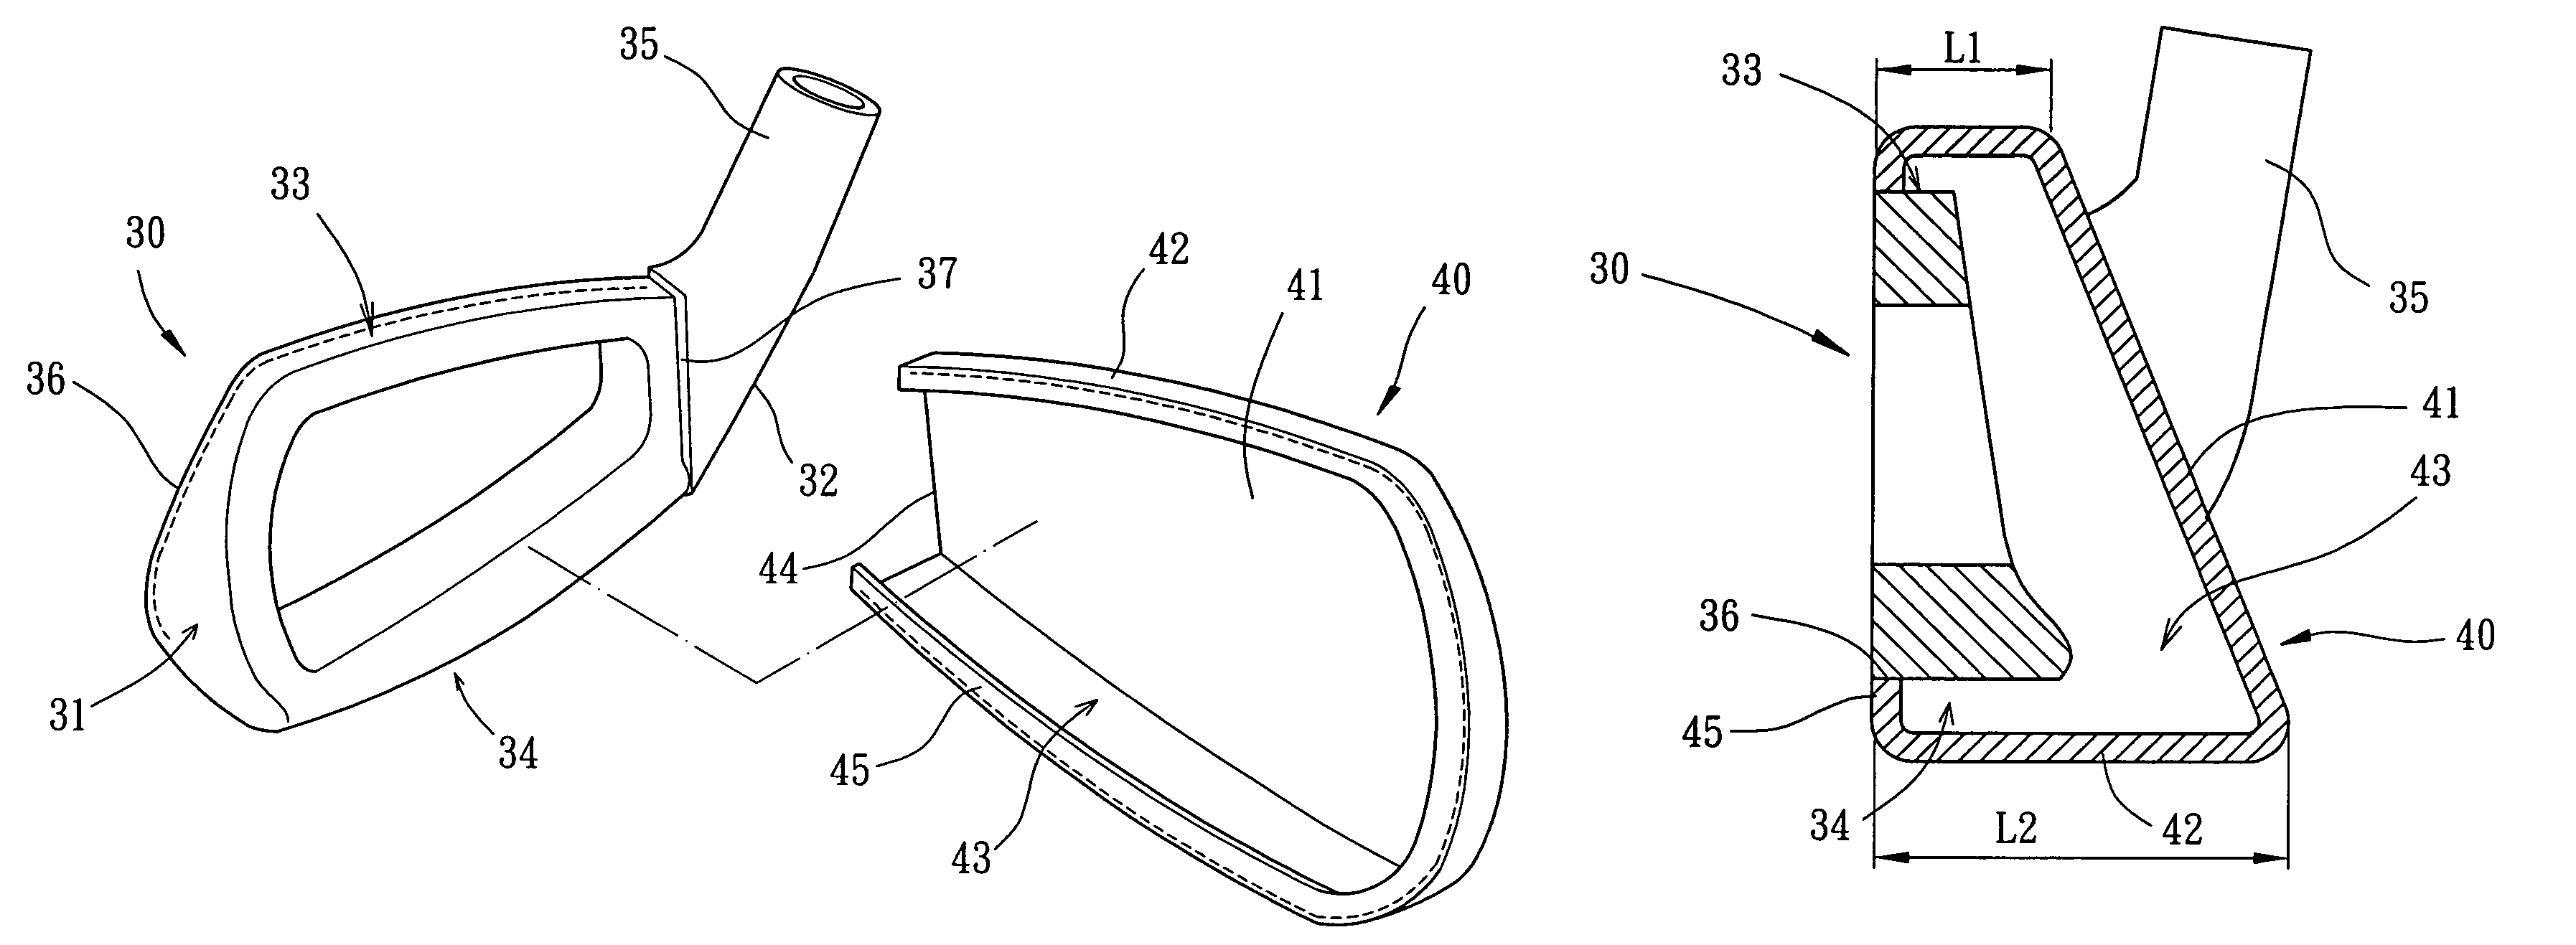 Golf club head having a connecting structure for a high degree of flexibility